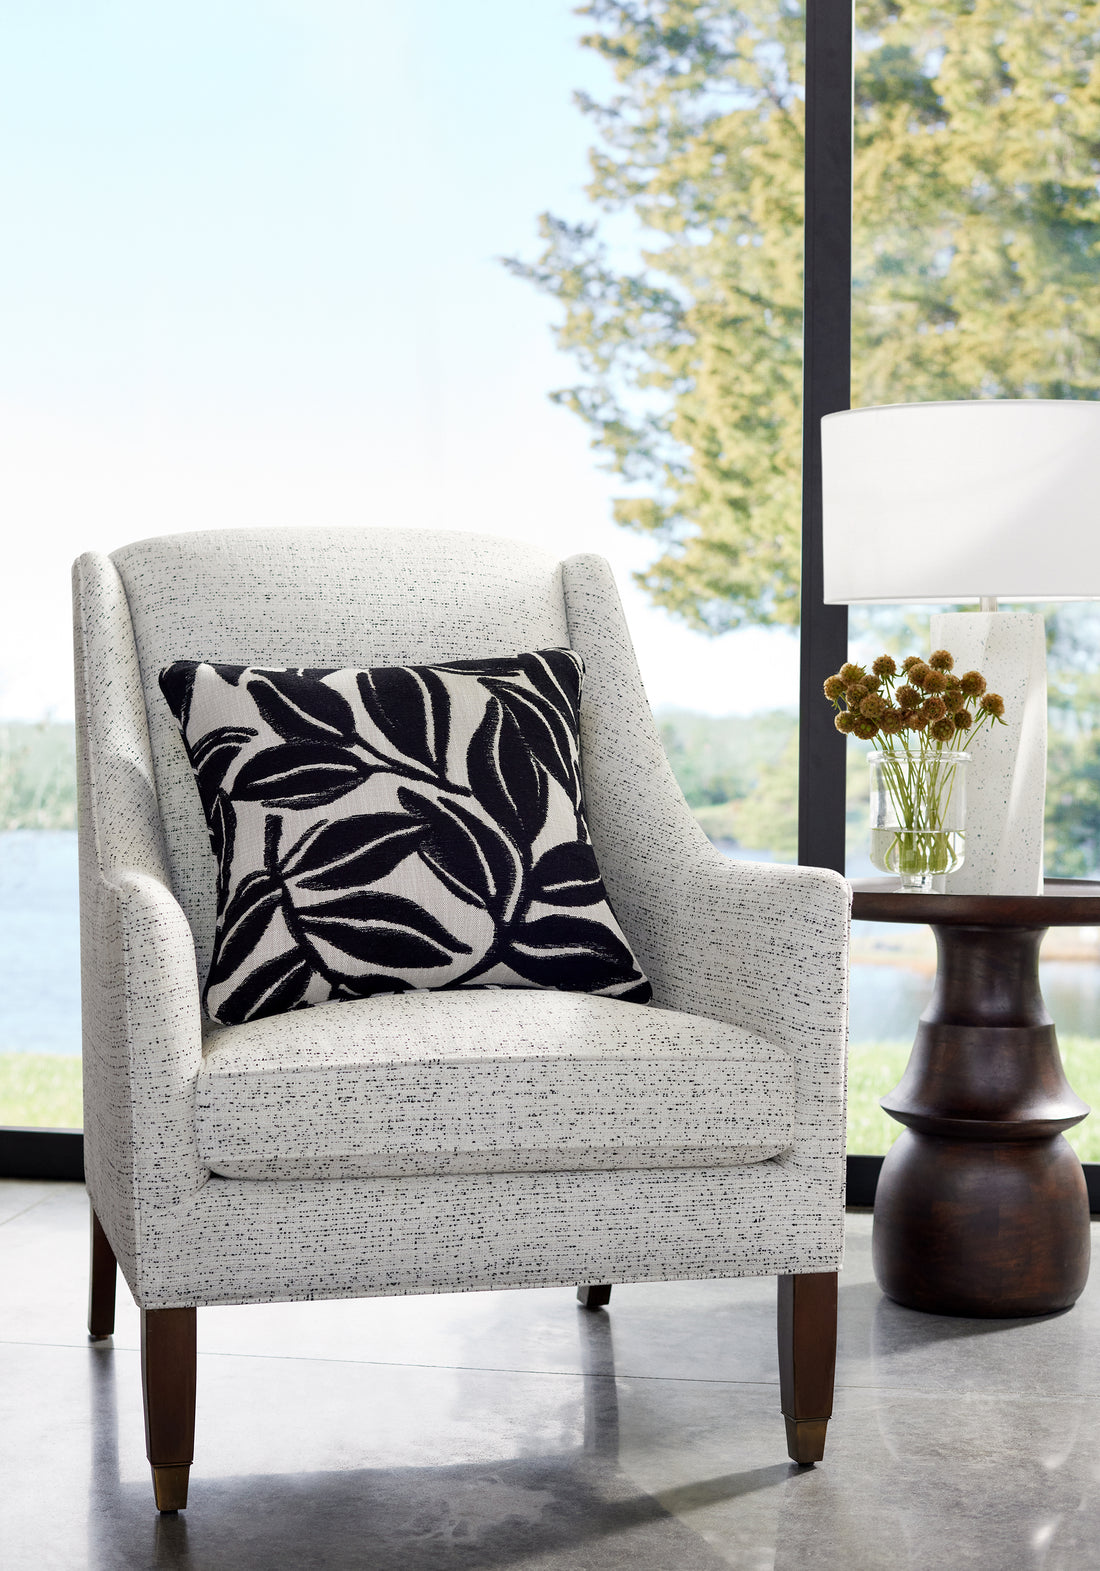 Pillow featuring Kona fabric in ebony color - pattern number W8815 - by Thibaut in the Haven collection